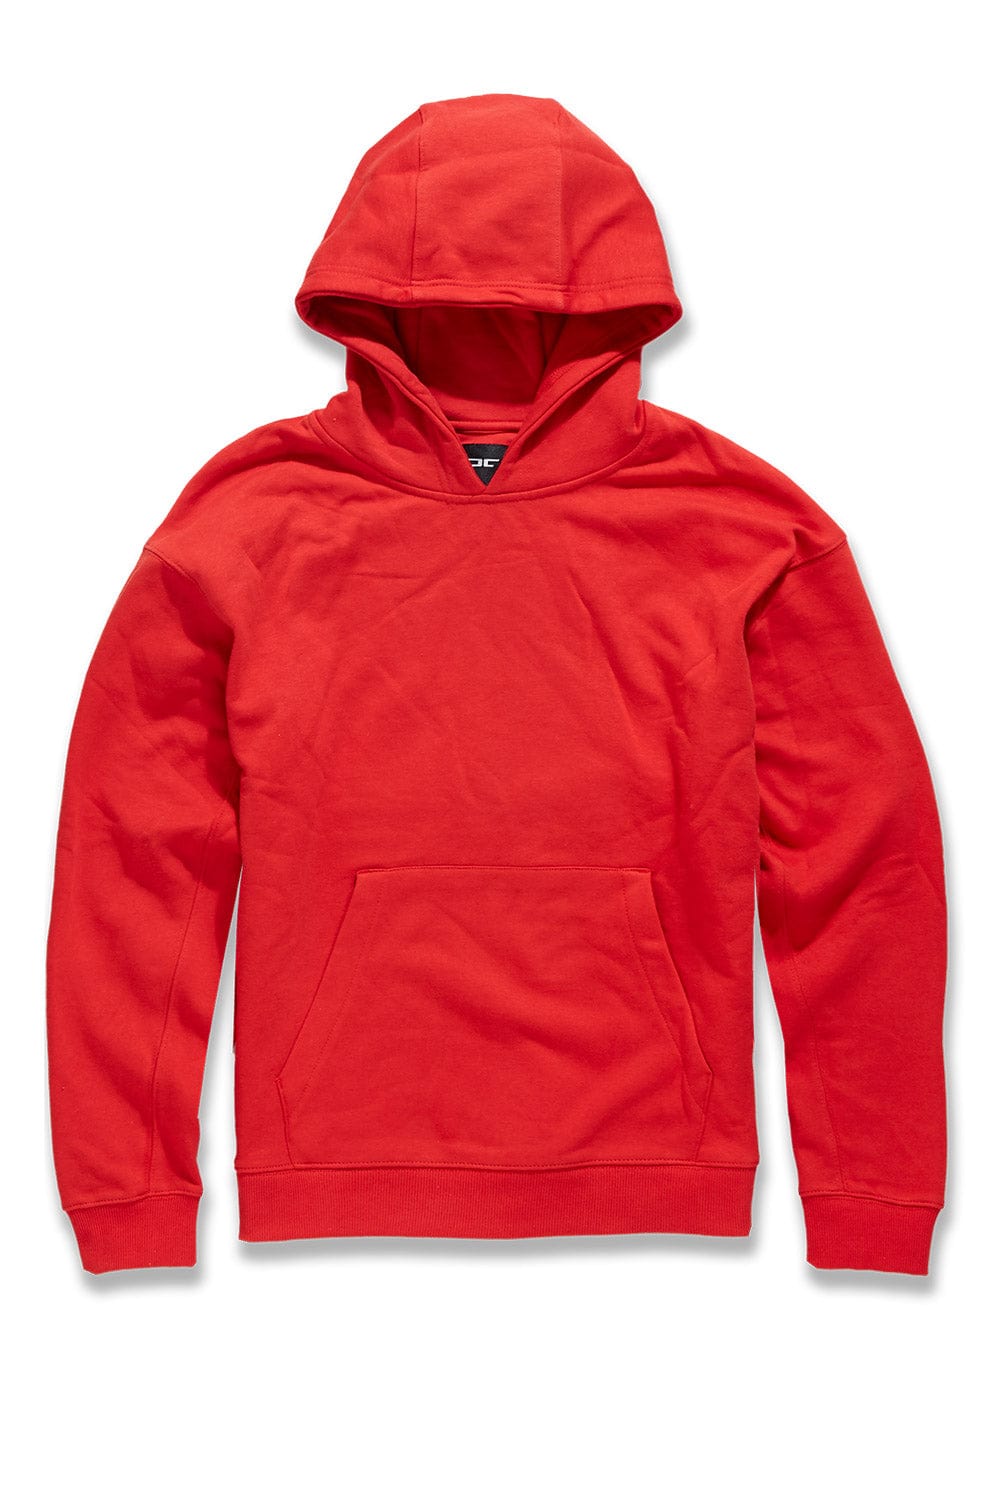 UPTOWN PULLOVER HOODIE (RED)